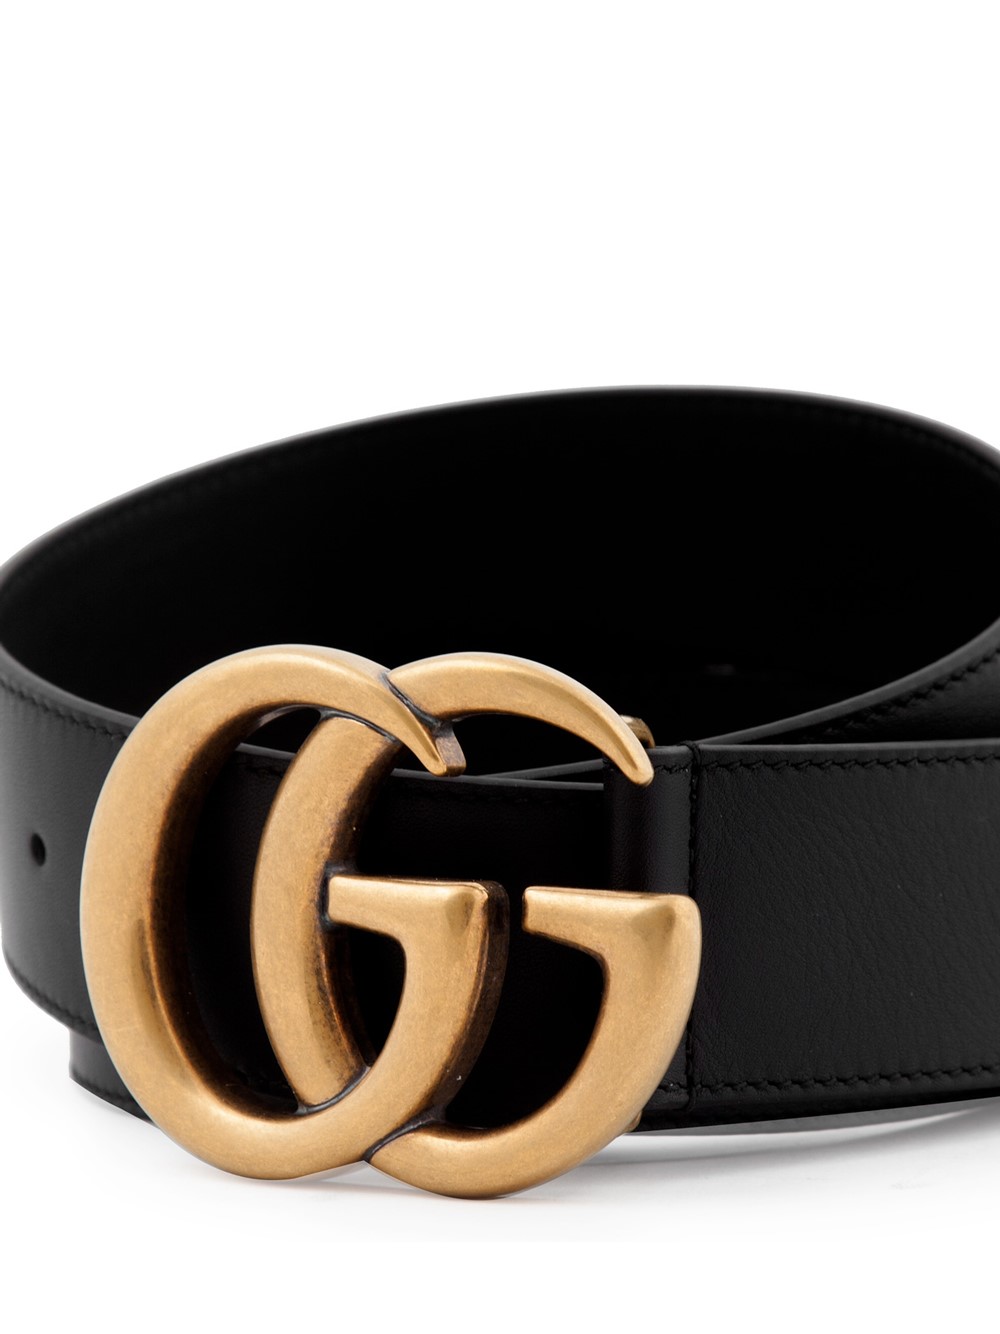 gucci GG MARMONT BELT available on www.bagssaleusa.com/product-category/classic-bags/ - 28984